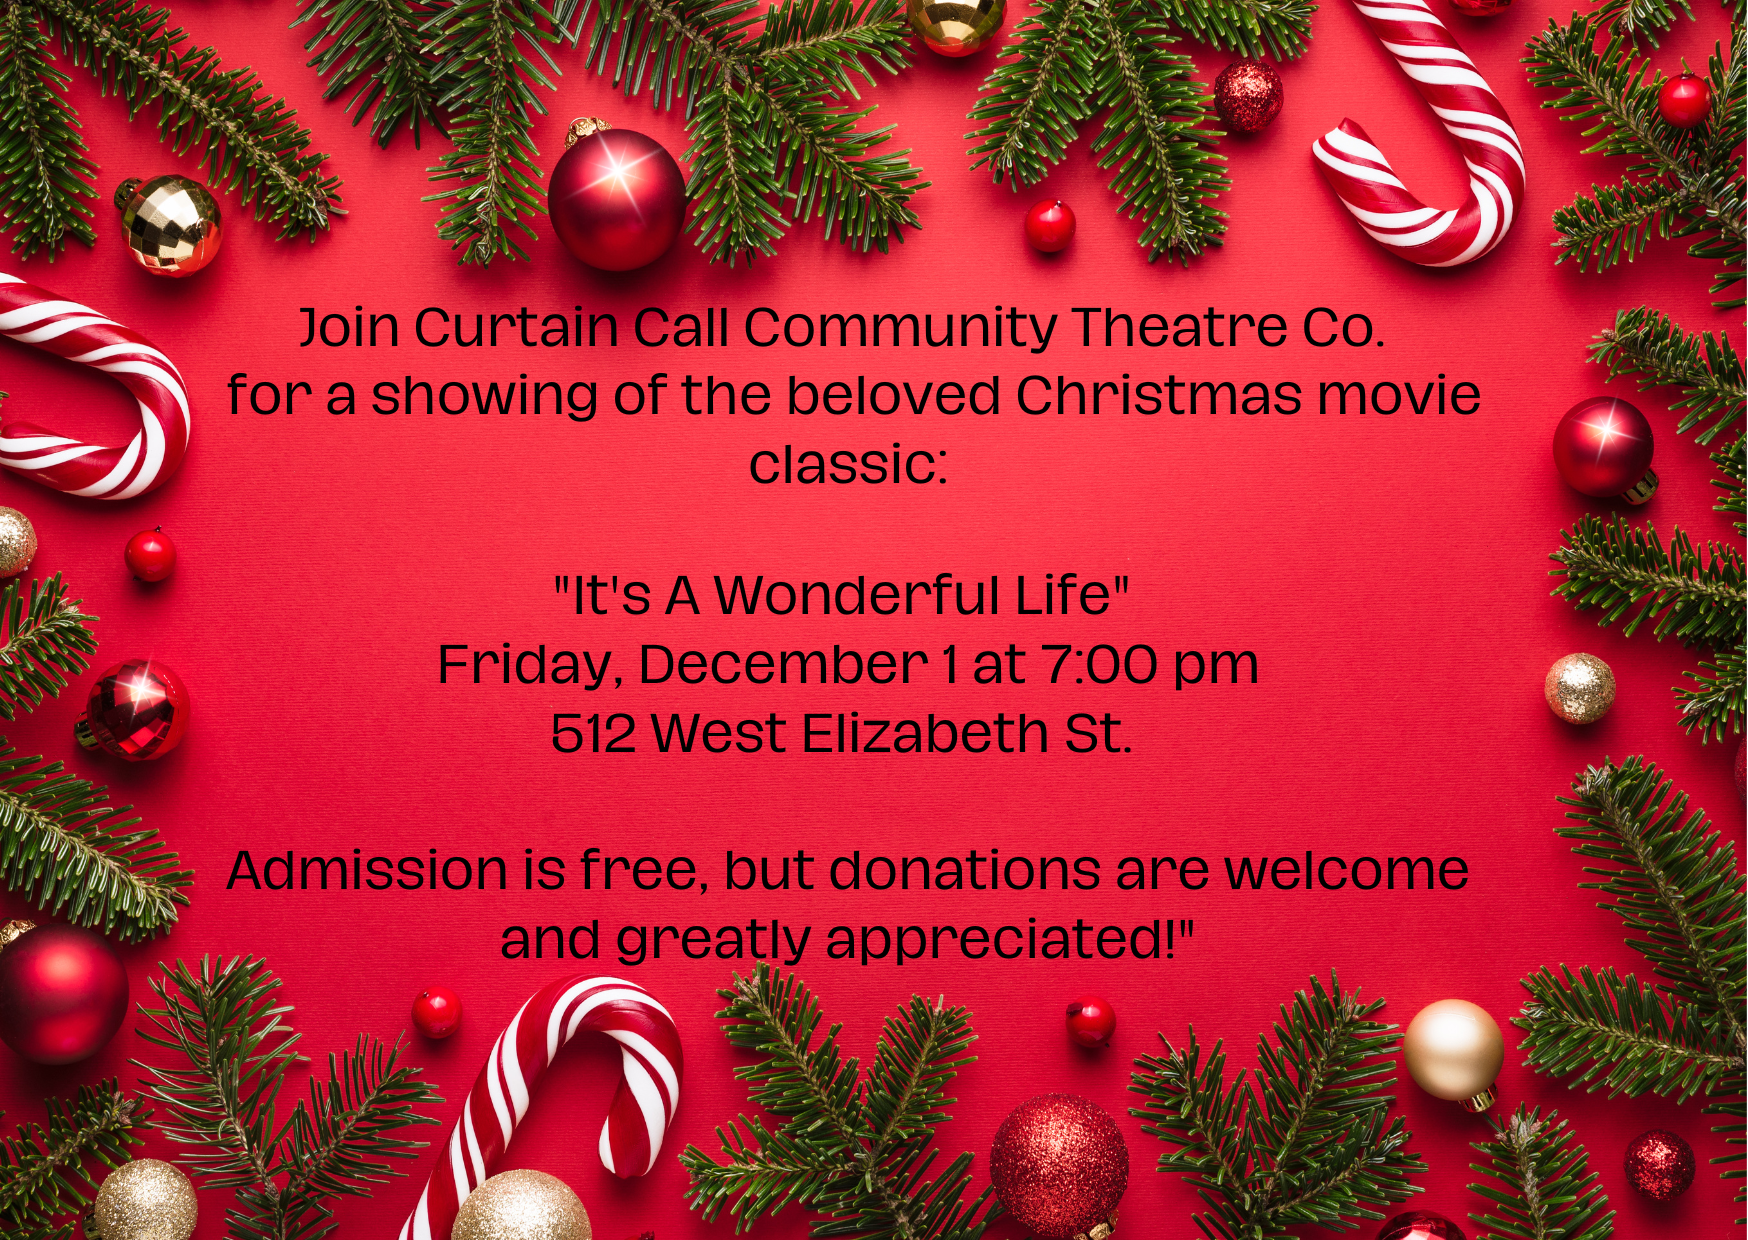 Check more about “It’s a Wonderful Life” movie showing 